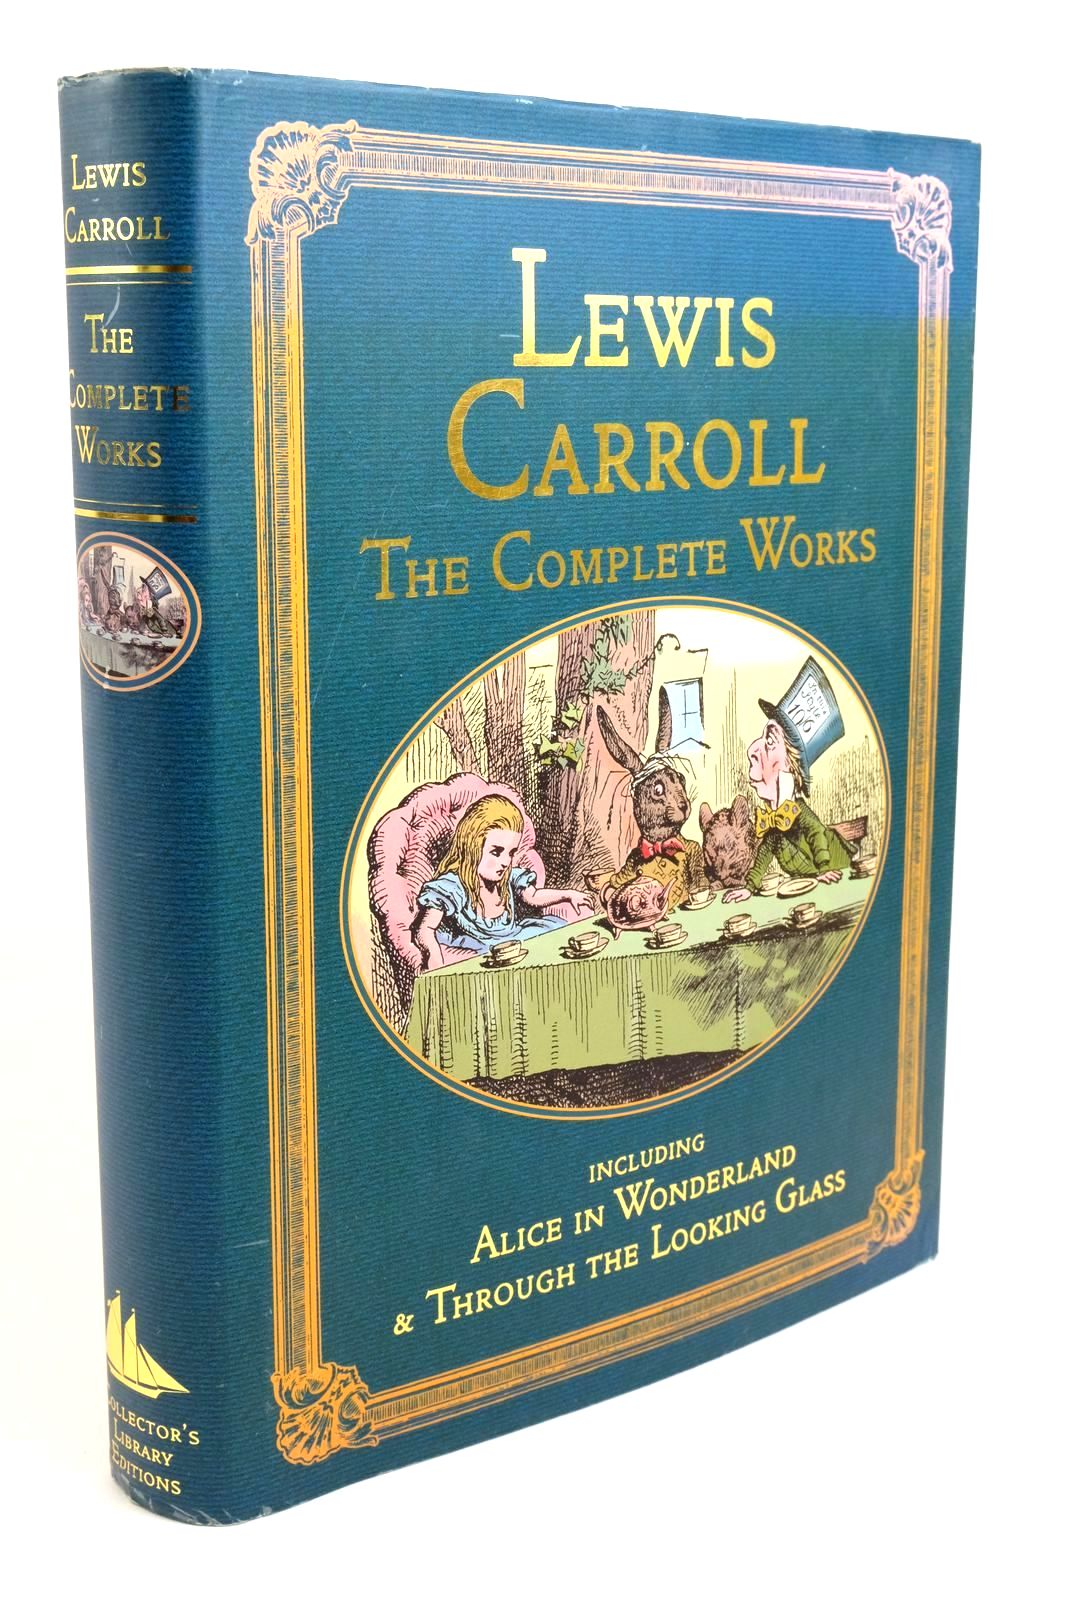 Photo of LEWIS CARROLL THE COMPLETE WORKS written by Carroll, Lewis illustrated by Tenniel, John Holiday, Henry Frost, Arthur B. Furniss, Harry published by Crw Publishing (STOCK CODE: 1322173)  for sale by Stella & Rose's Books